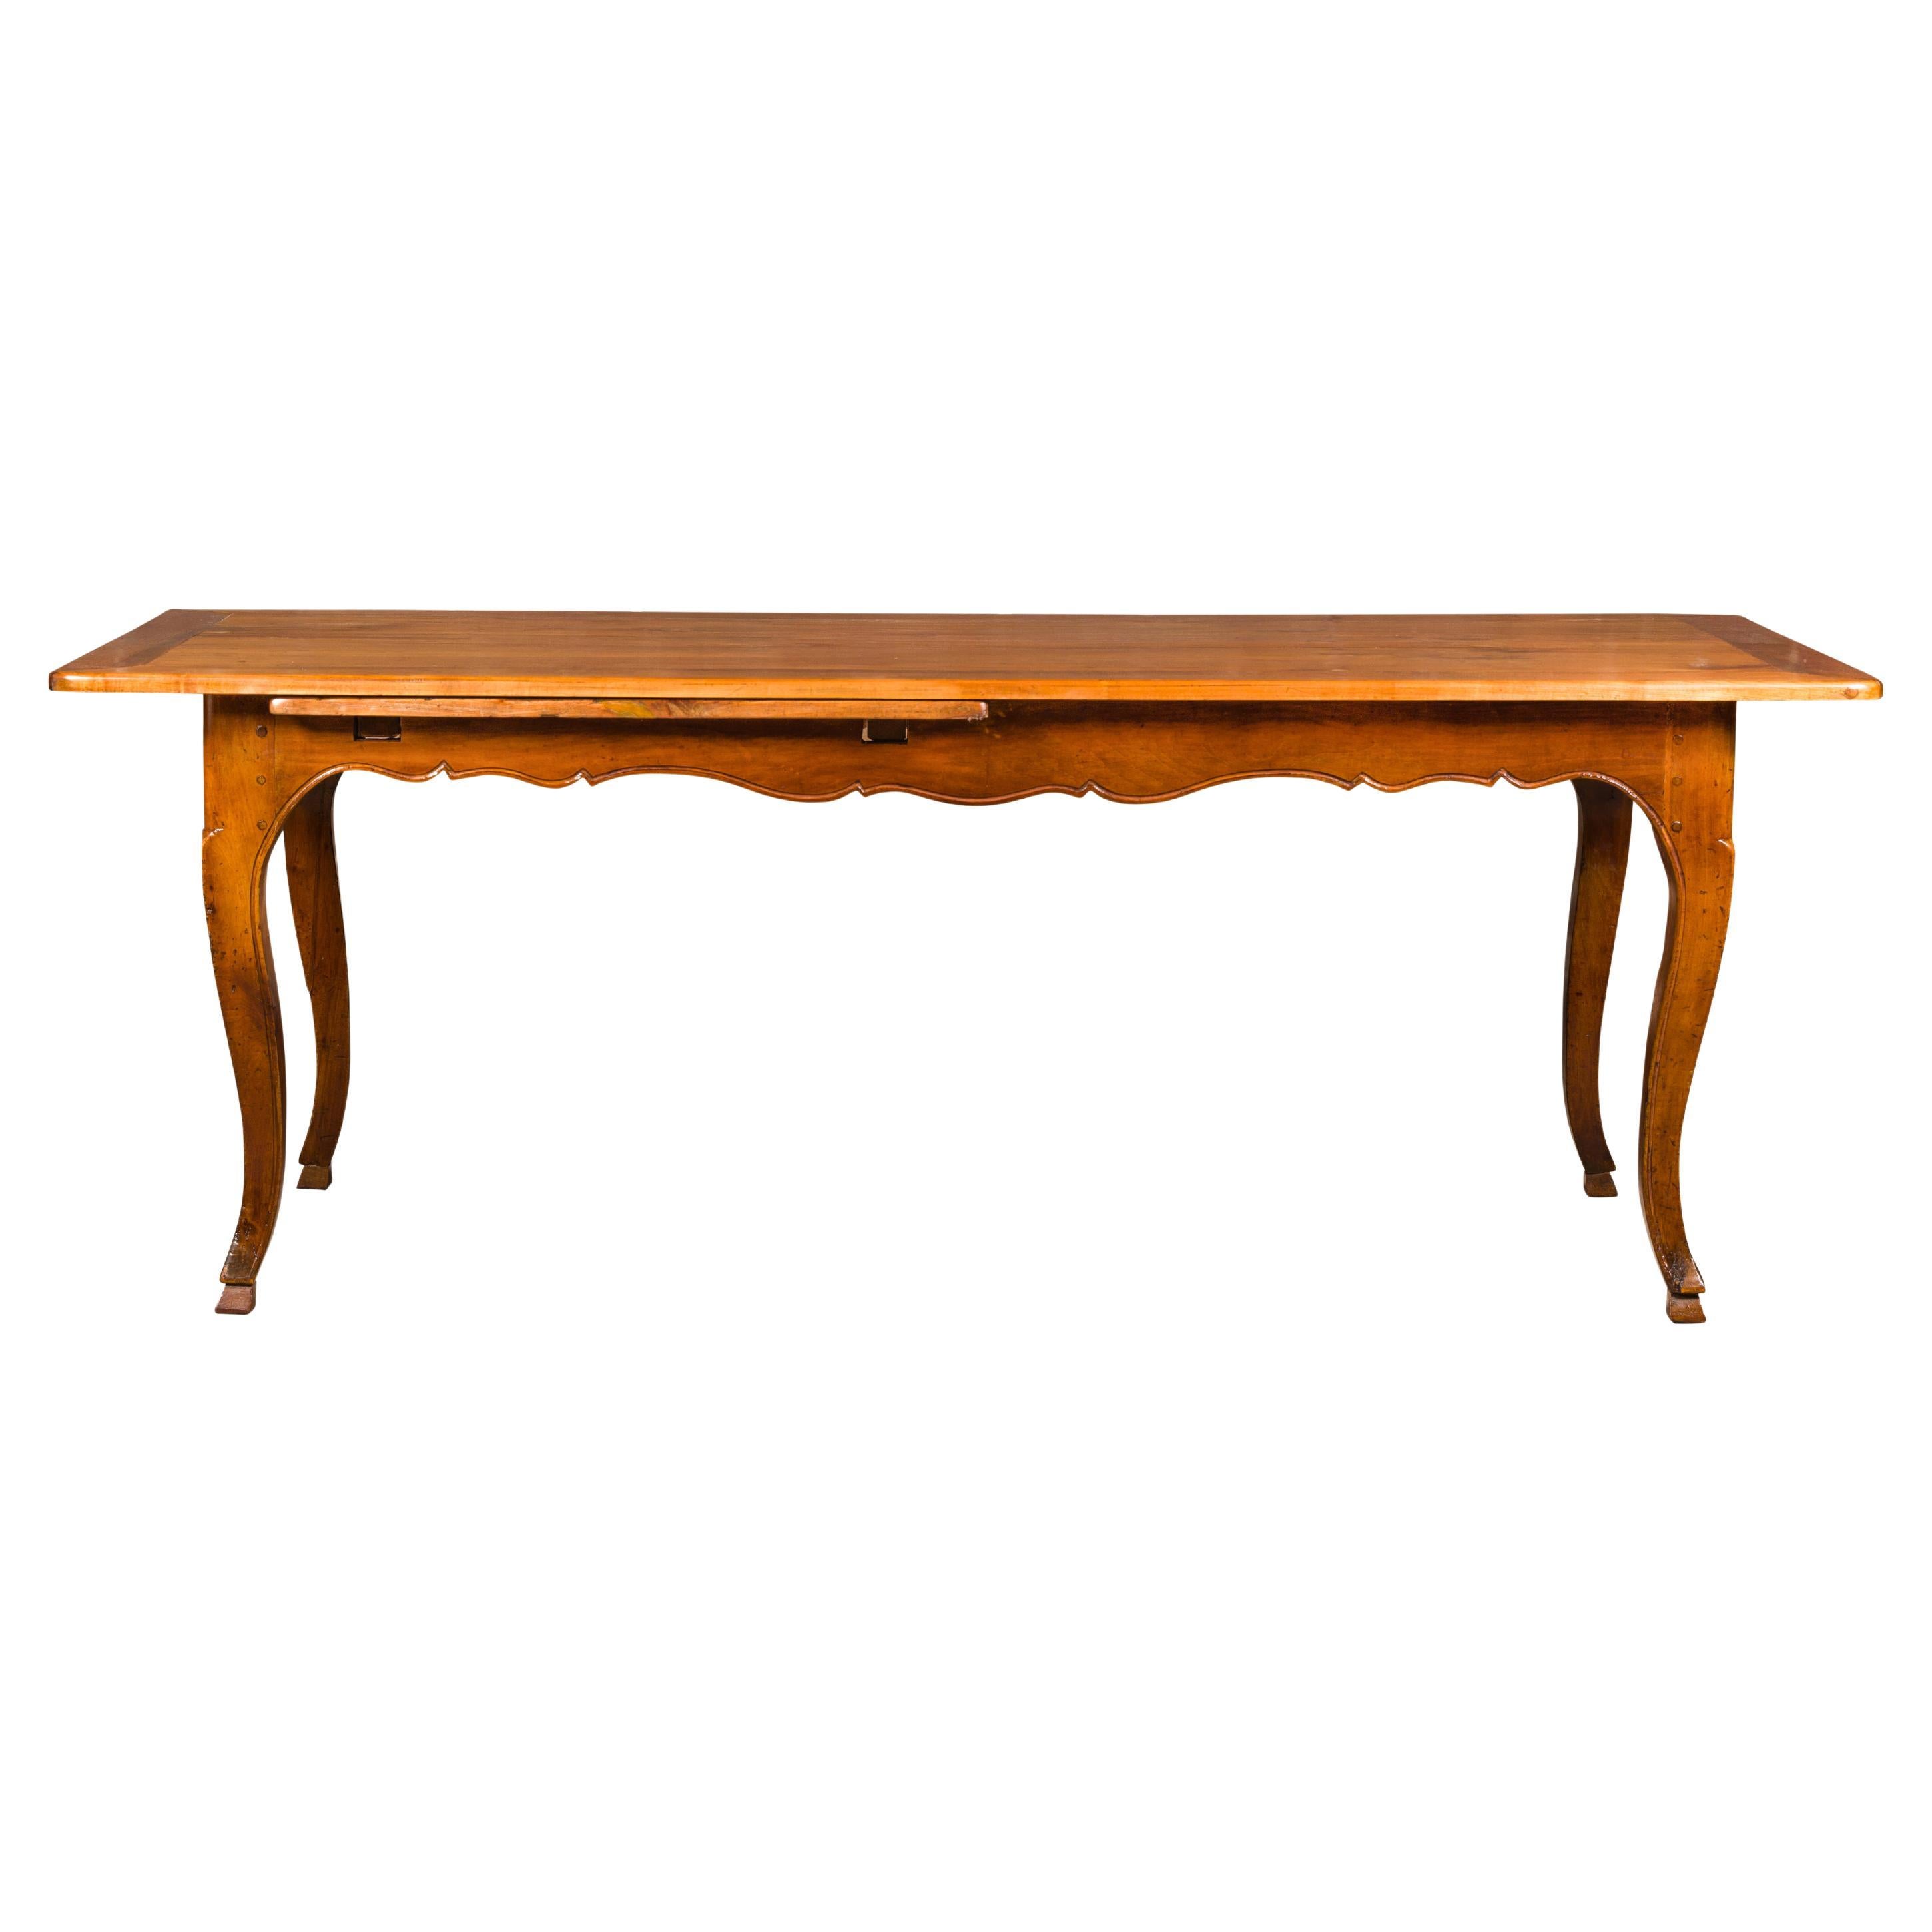 19th Century French Fruitwood Dining Table with Bread Board and Cabriole Legs For Sale